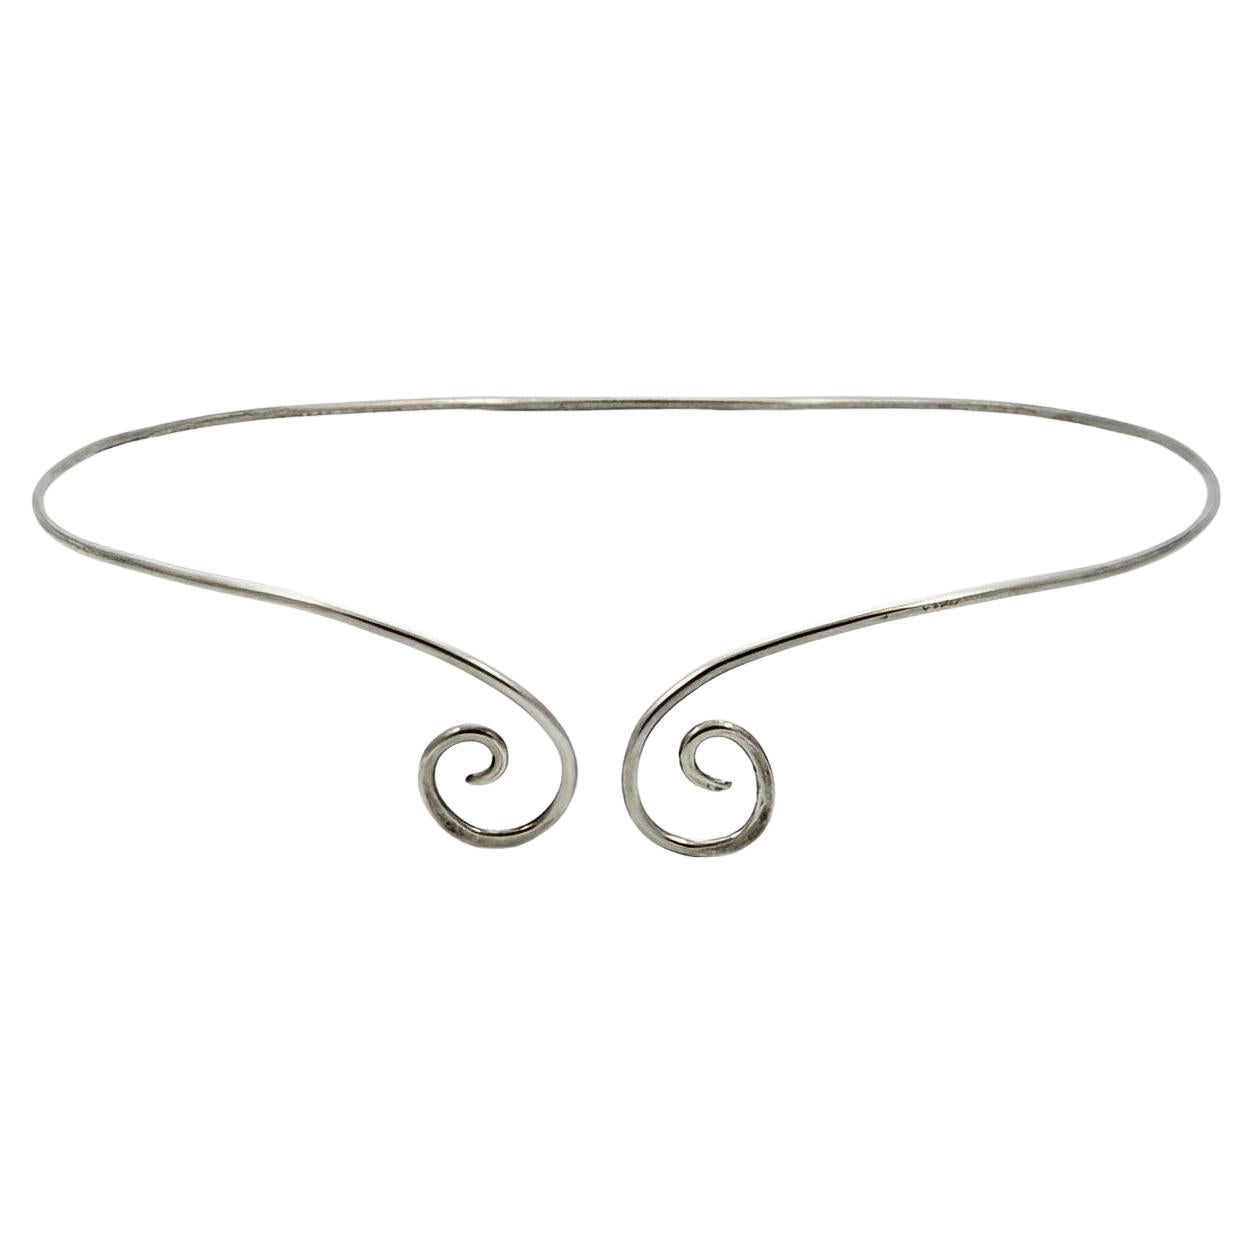 Sterling Silver Torque Collar Necklace with Swirl Detail 1990s